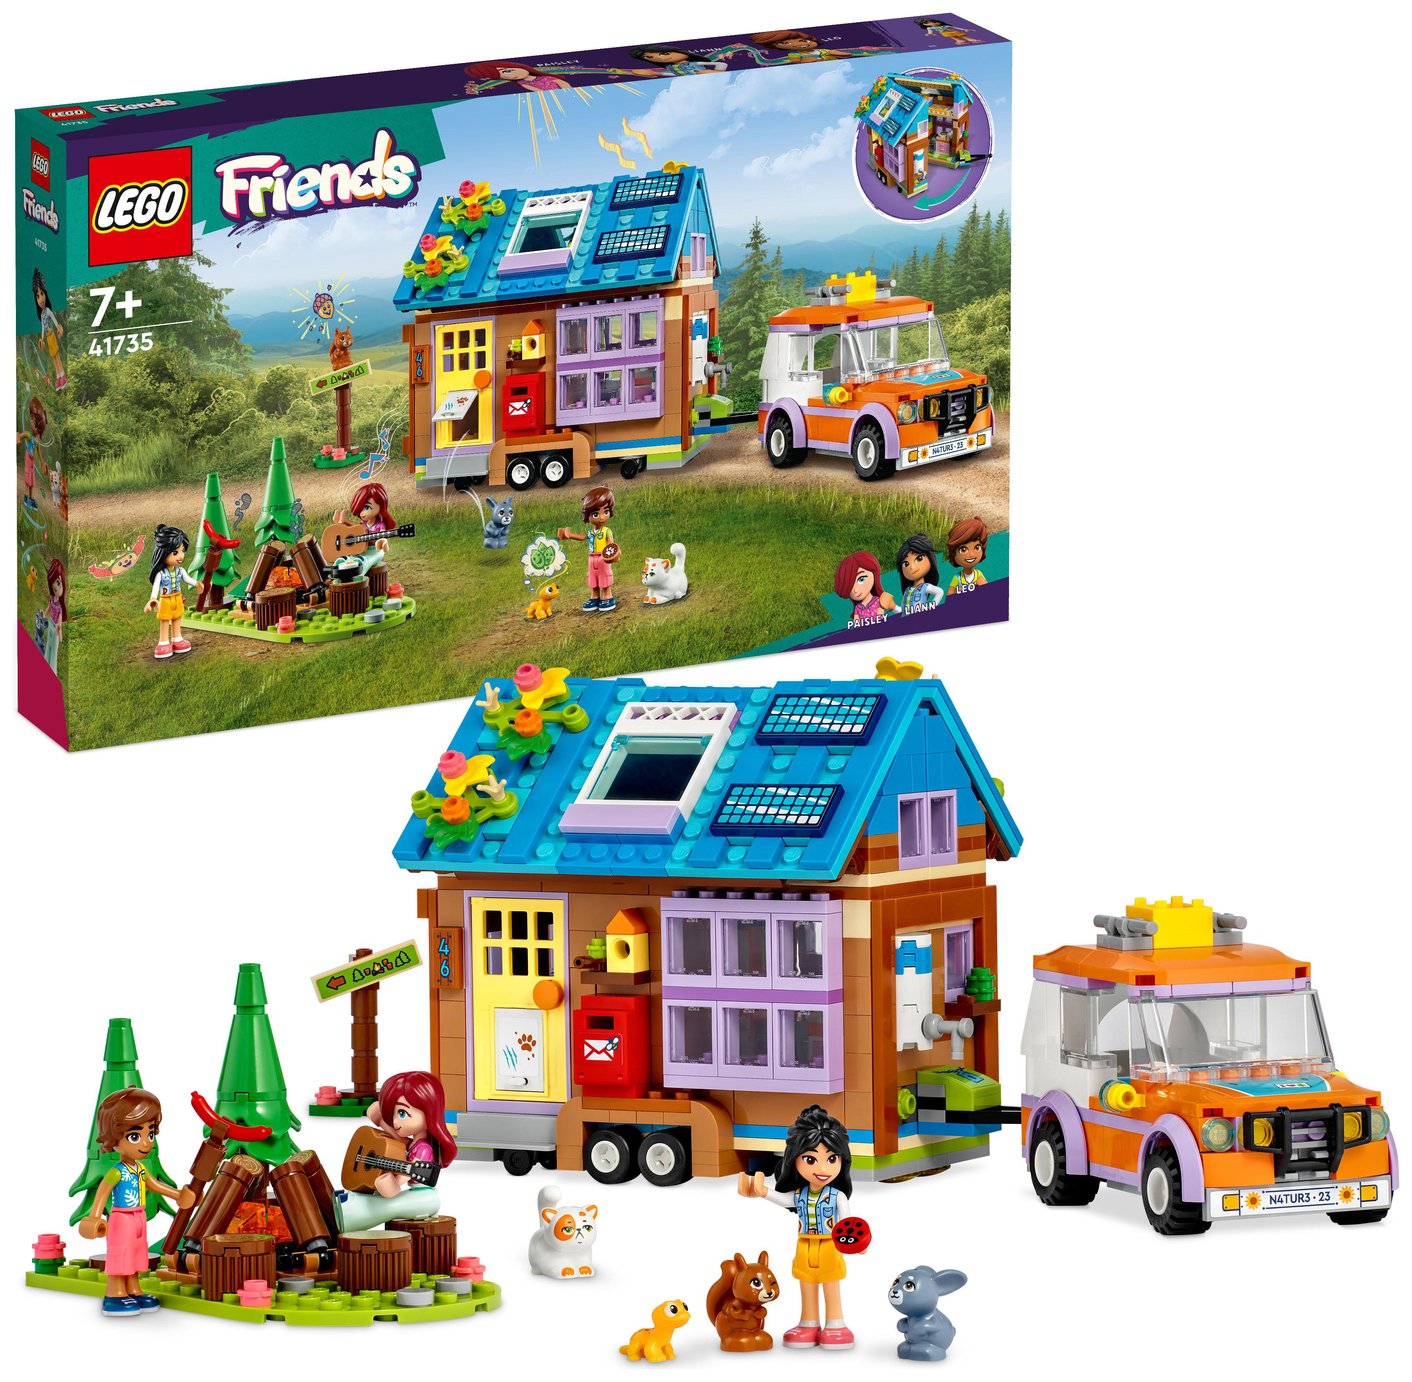 LEGO Friends Mobile Tiny House Playset with Toy Car 41735